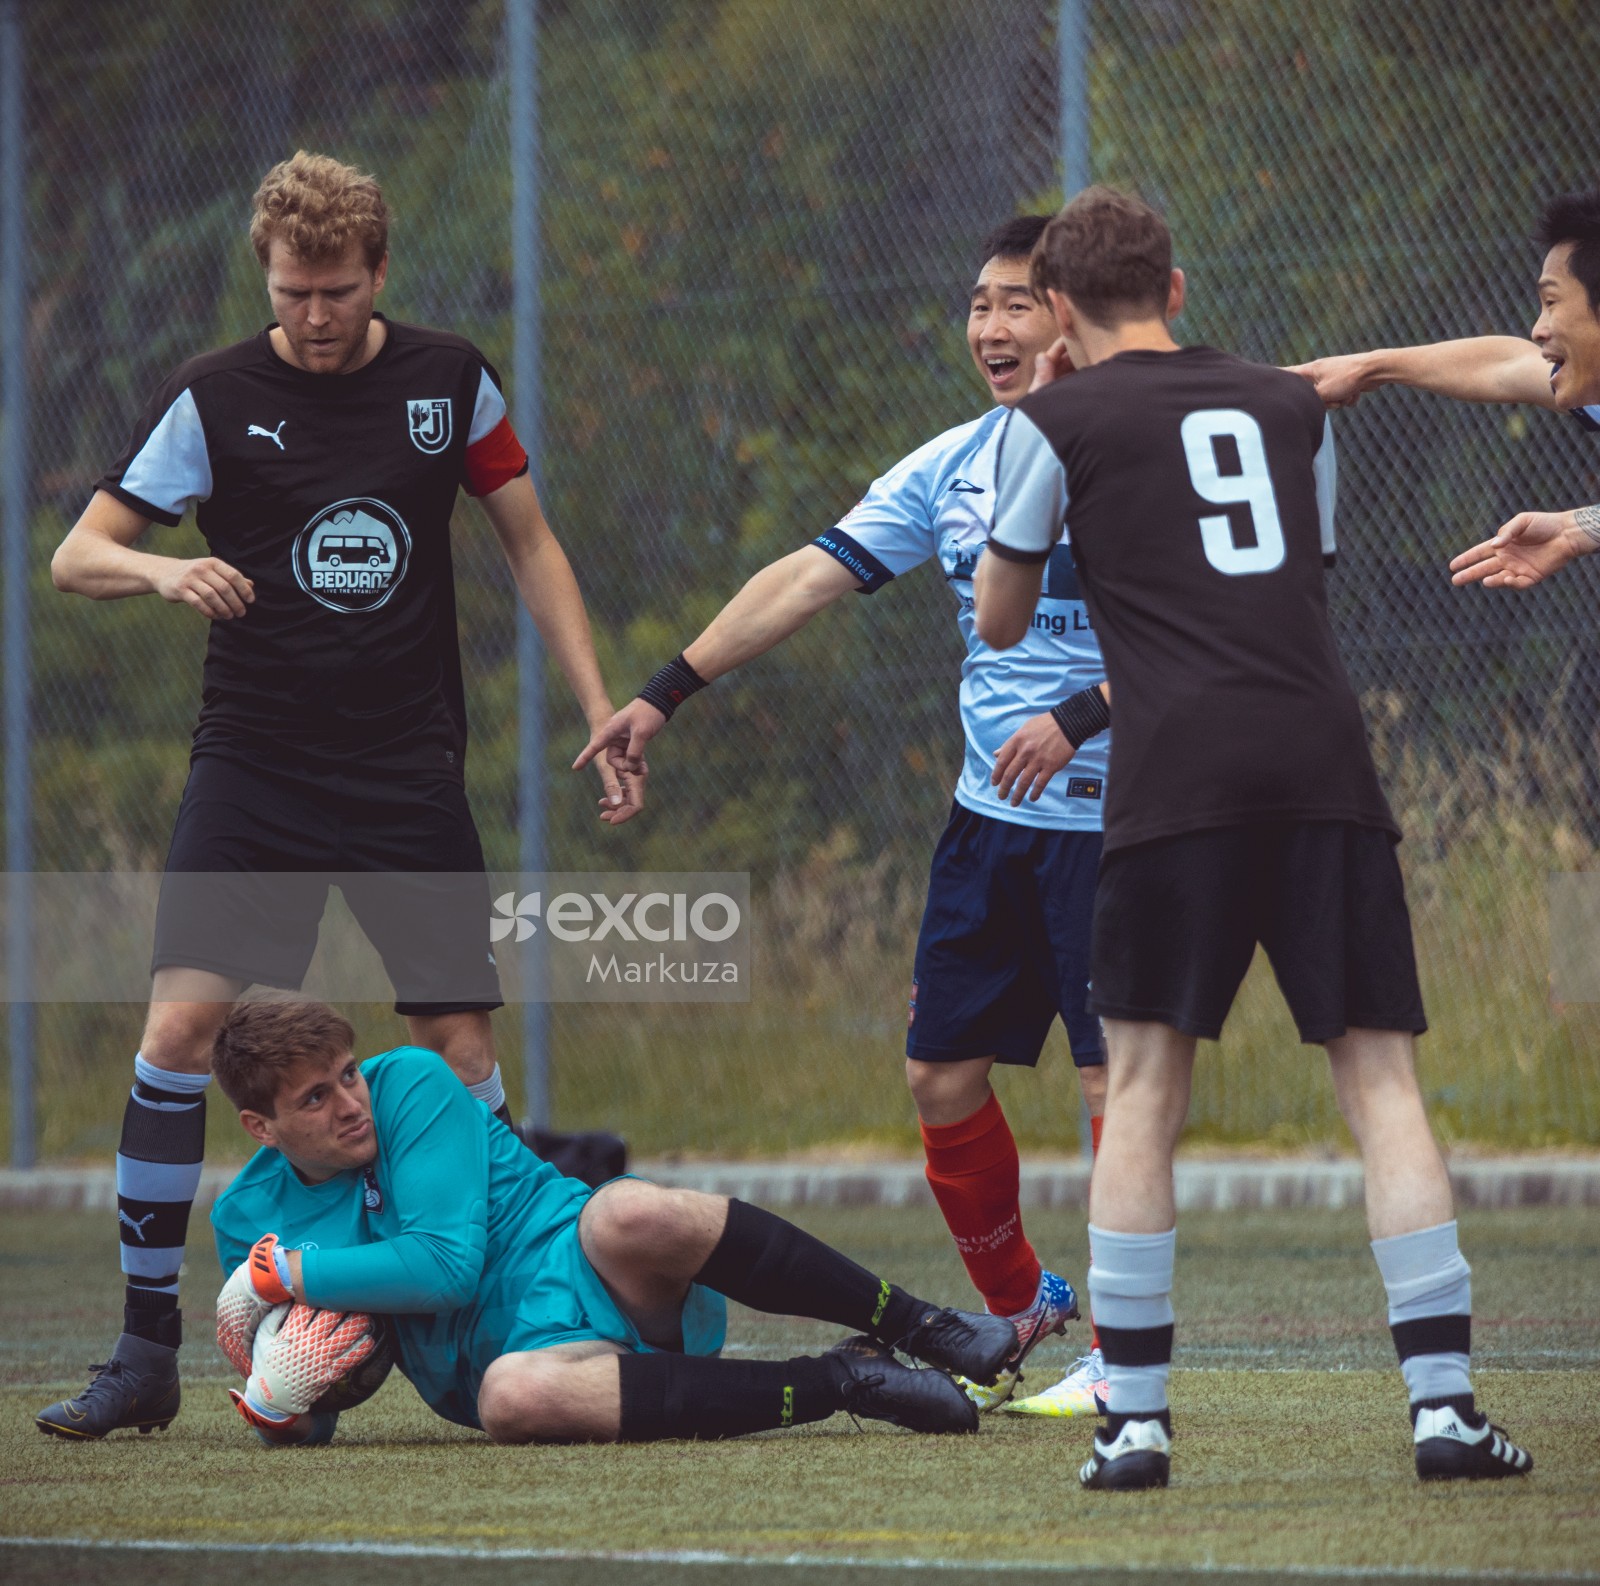 Players point at goalkeeper on the ground holding football - Sports Zone sunday league